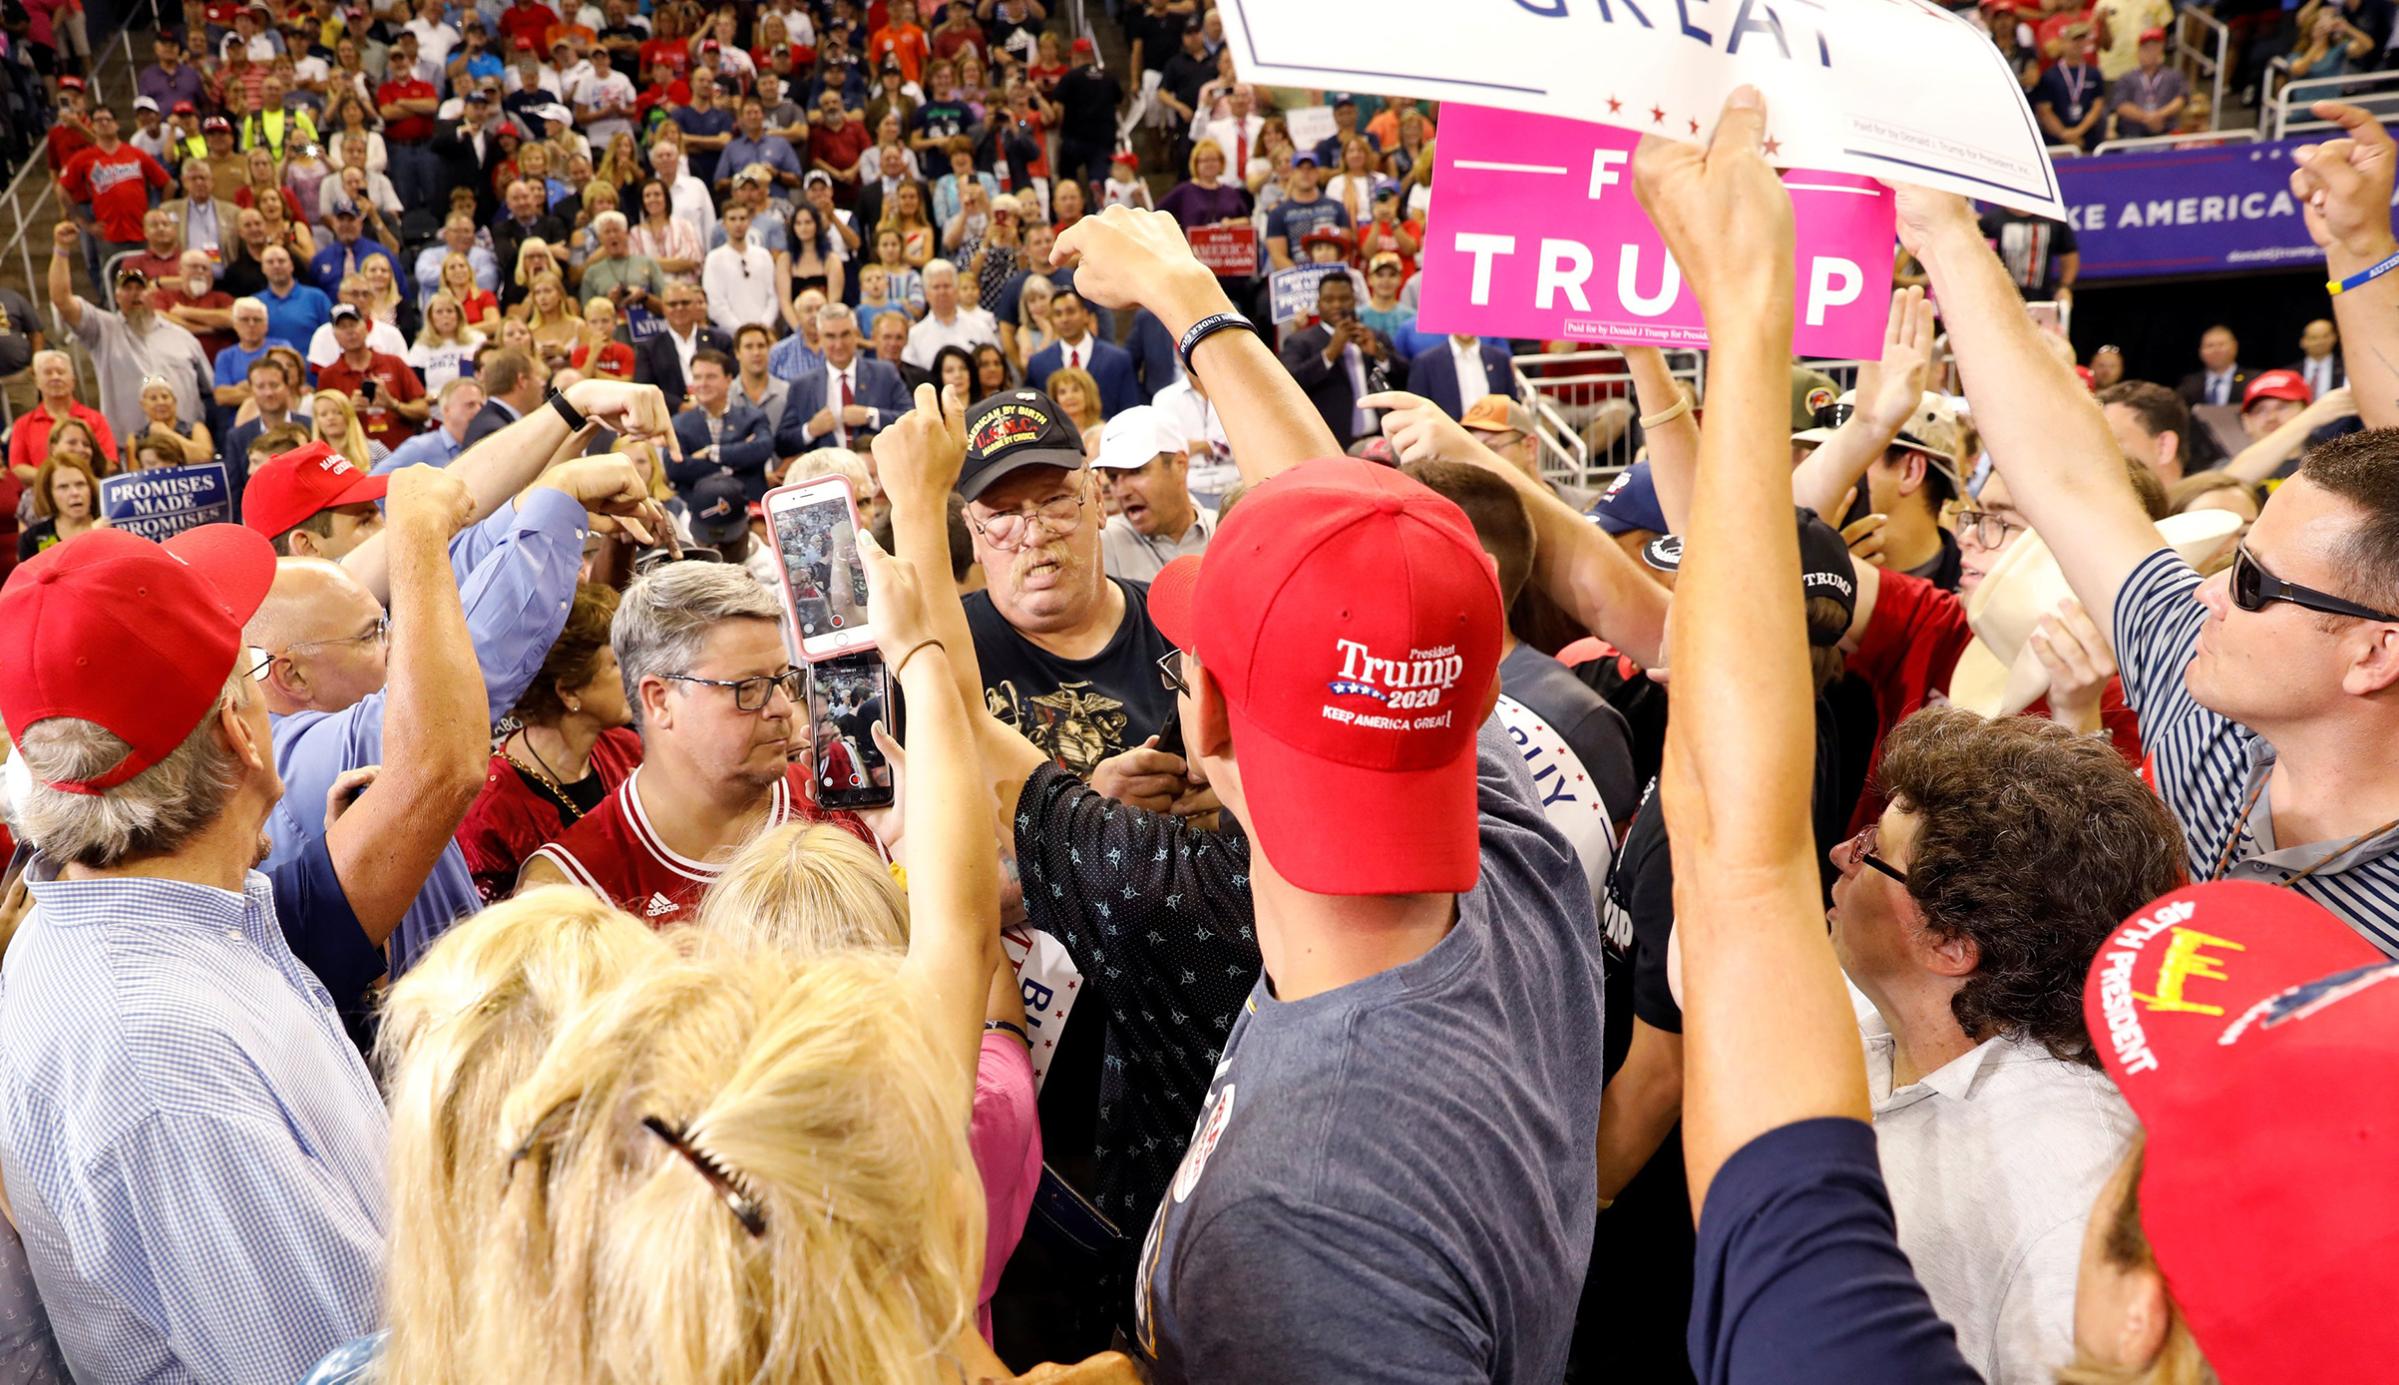 Trump supporters point out a protester to be removed during President Trump's "Make America Great Again" rally in Evansville, Ind, August 30, 2018.